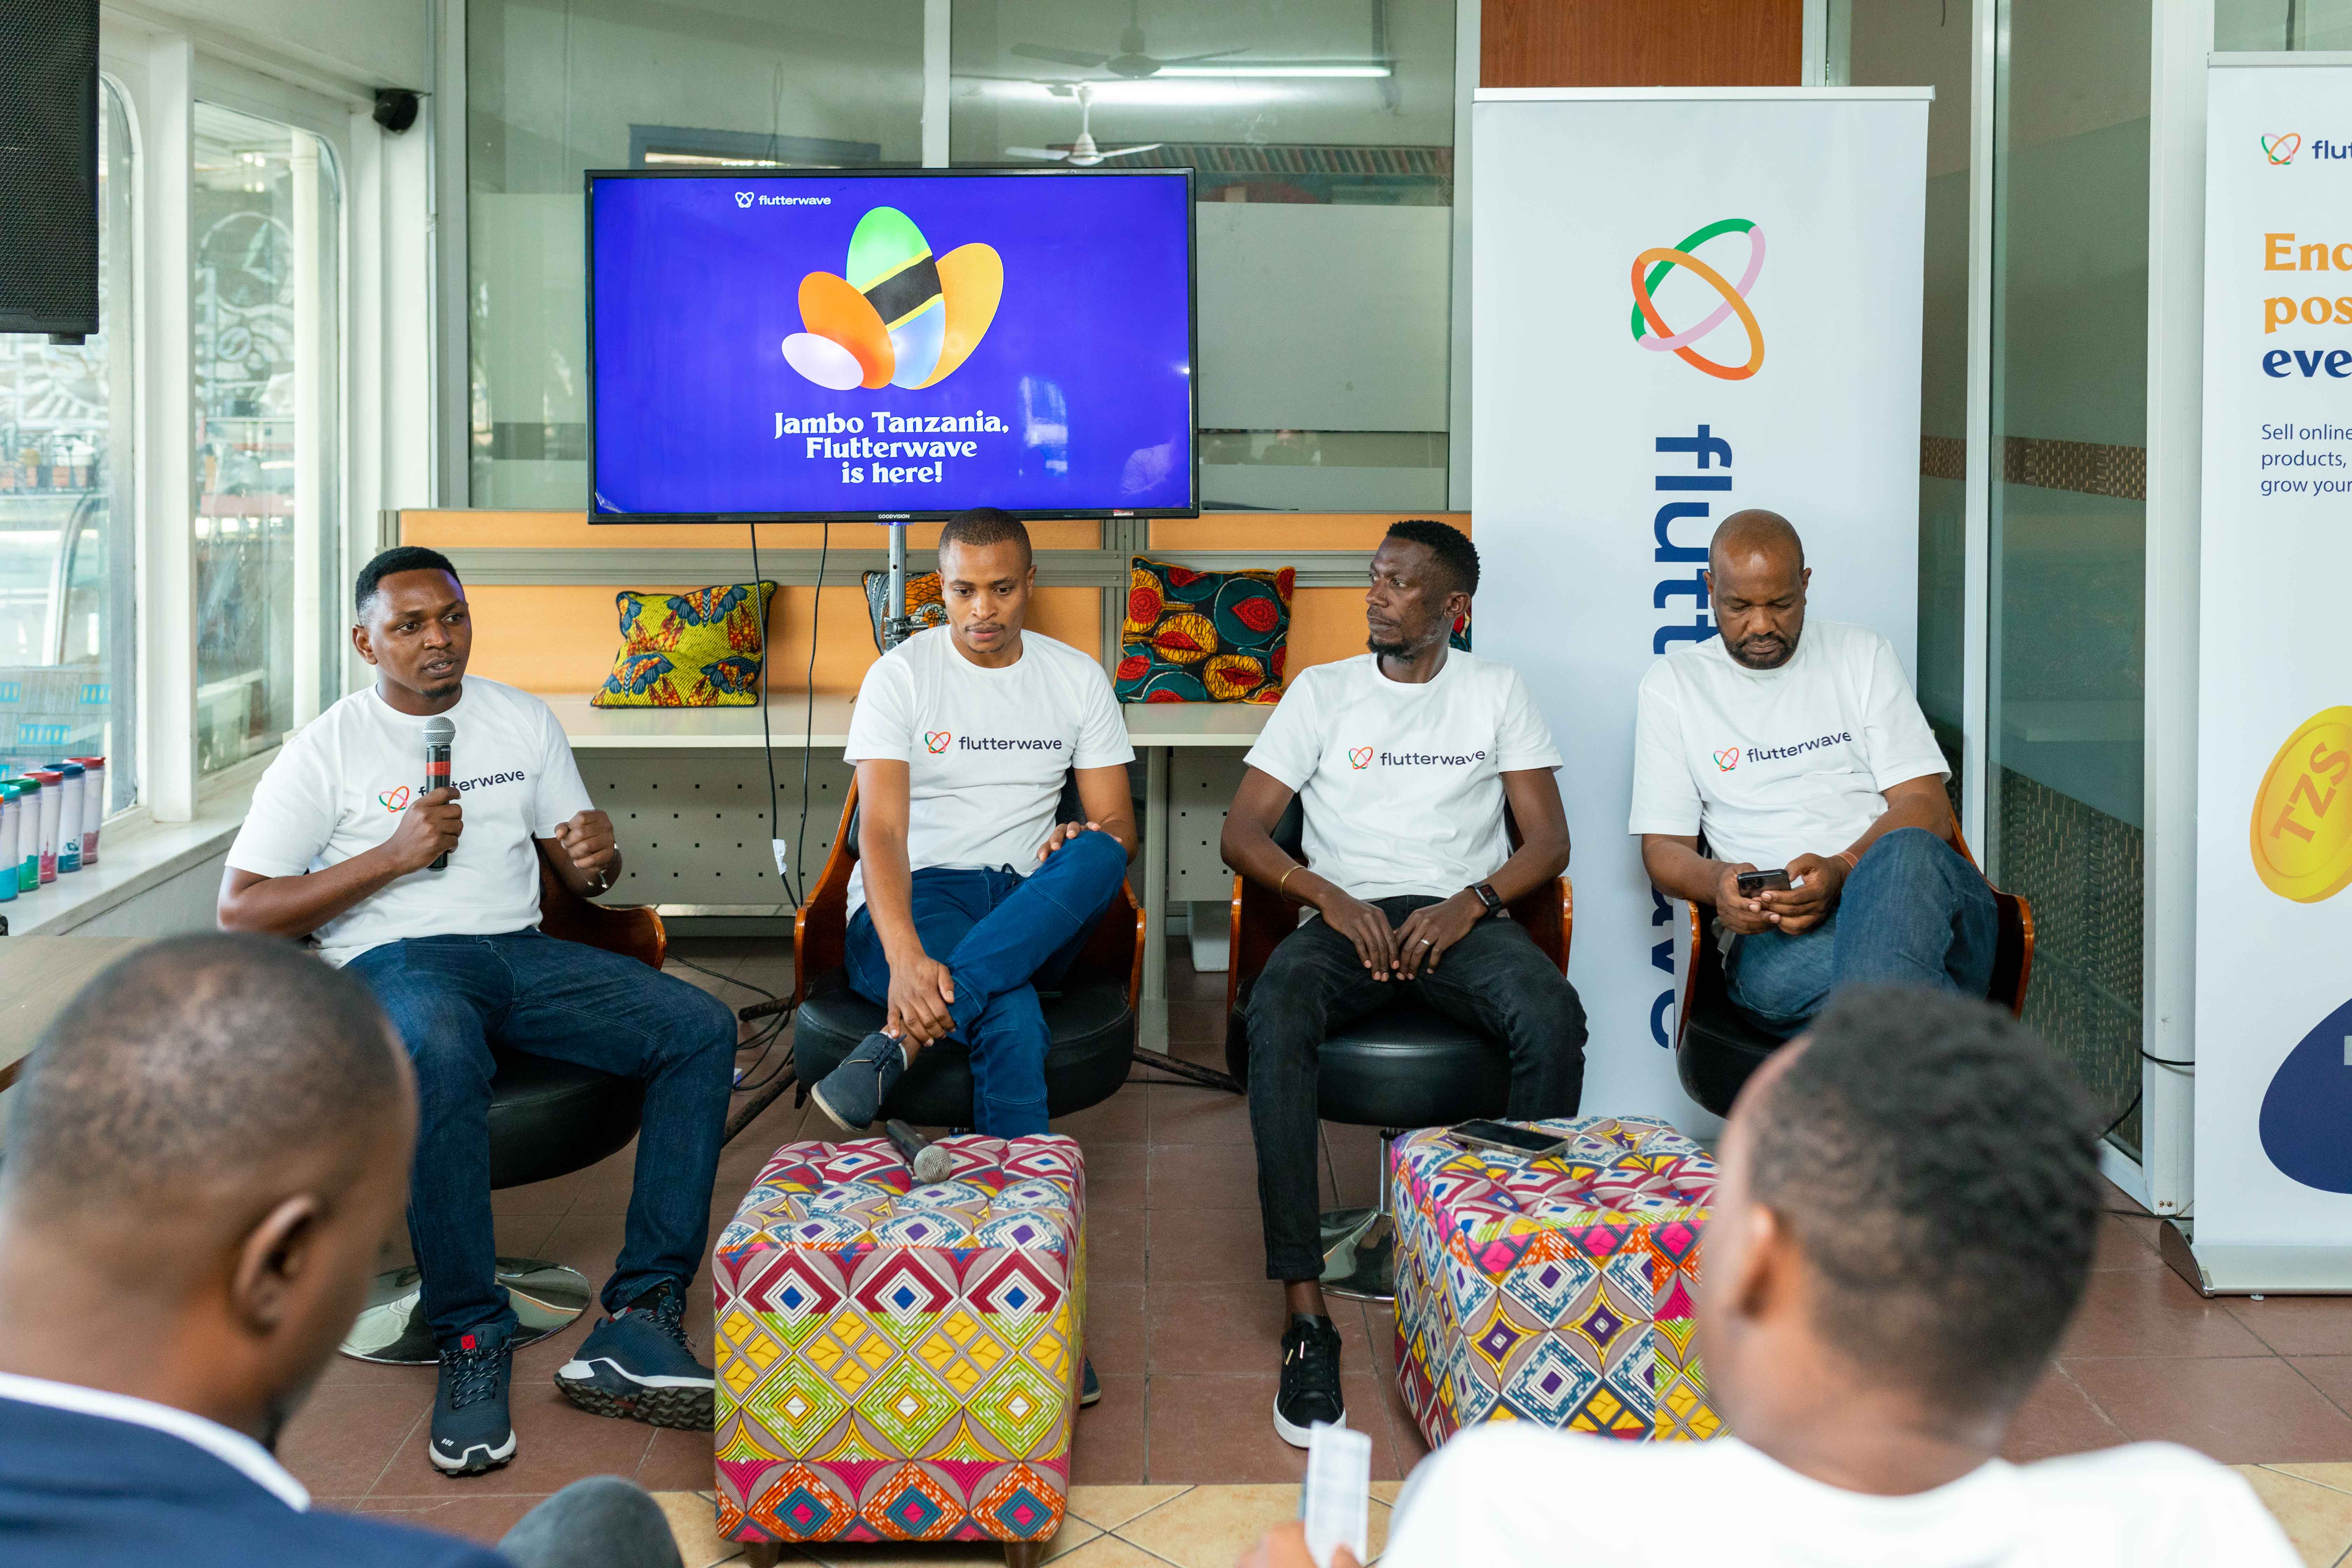 Flutterwave Launches in Tanzania